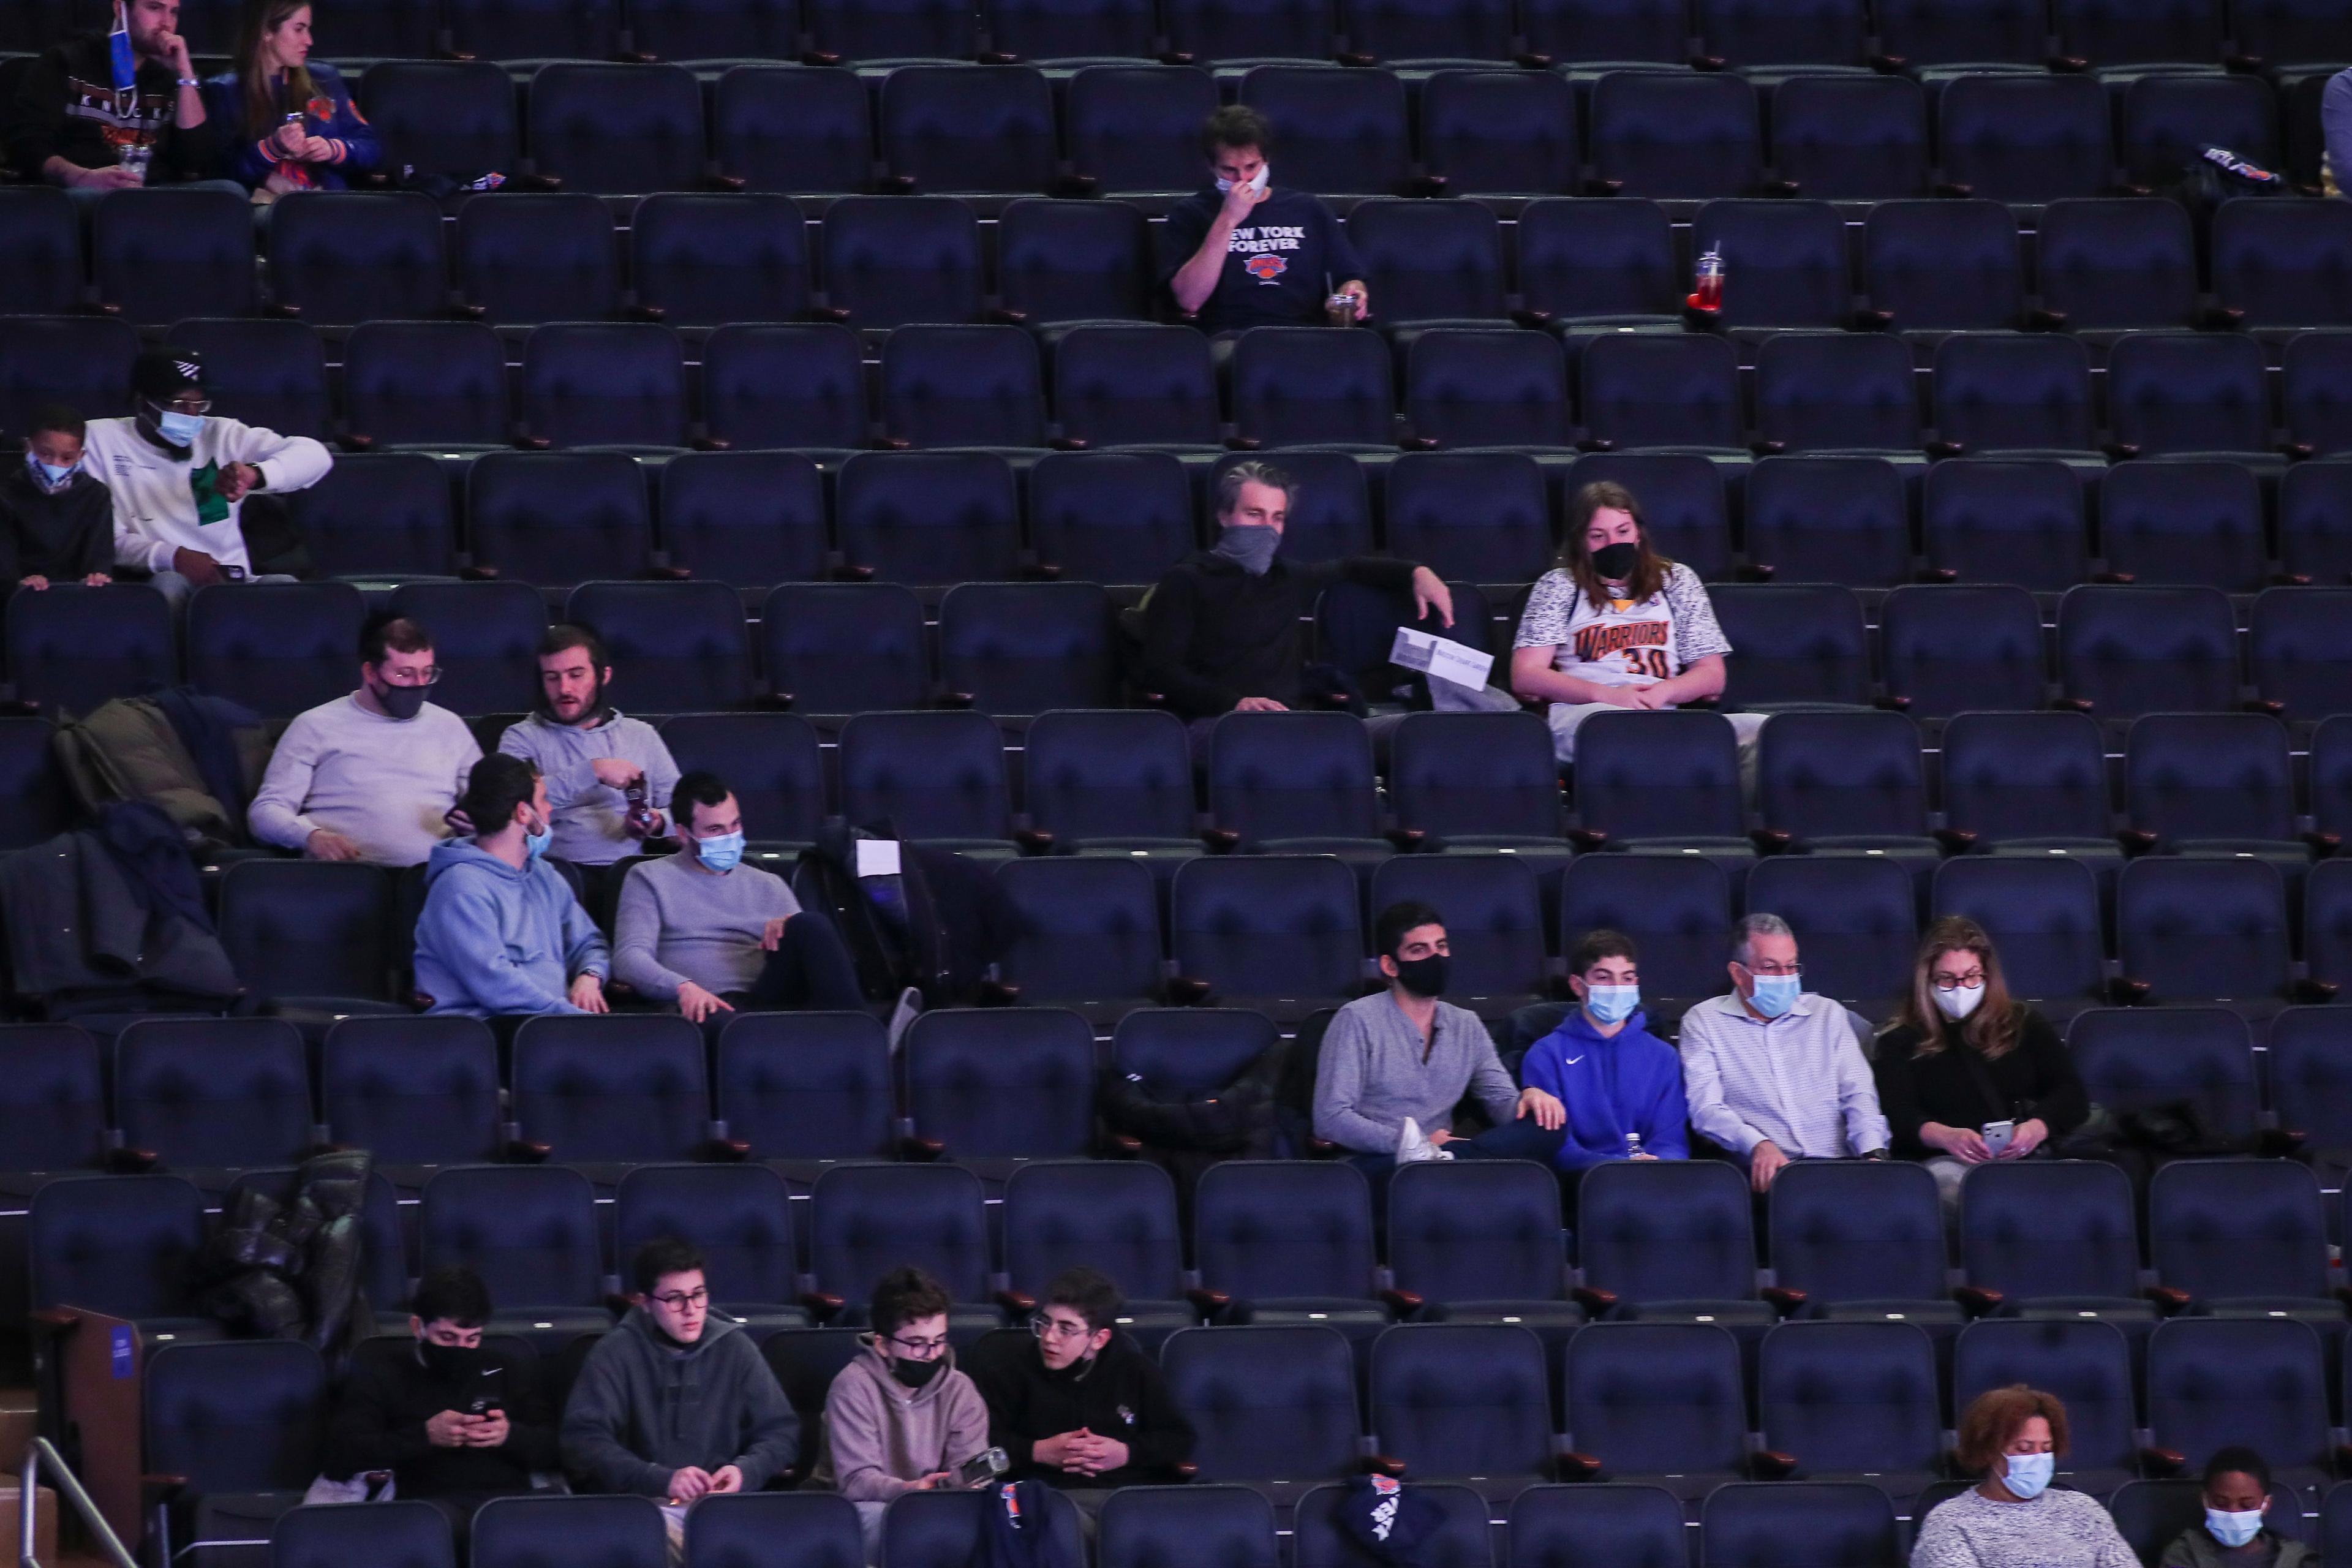 Feb 23, 2021; New York, New York, USA; Fans watch the New York Knicks play against the Golden State Warriors at Madison Square Garden. Mandatory Credit: Wendell Cruz-USA TODAY Sports / Wendell Cruz-USA TODAY Sports